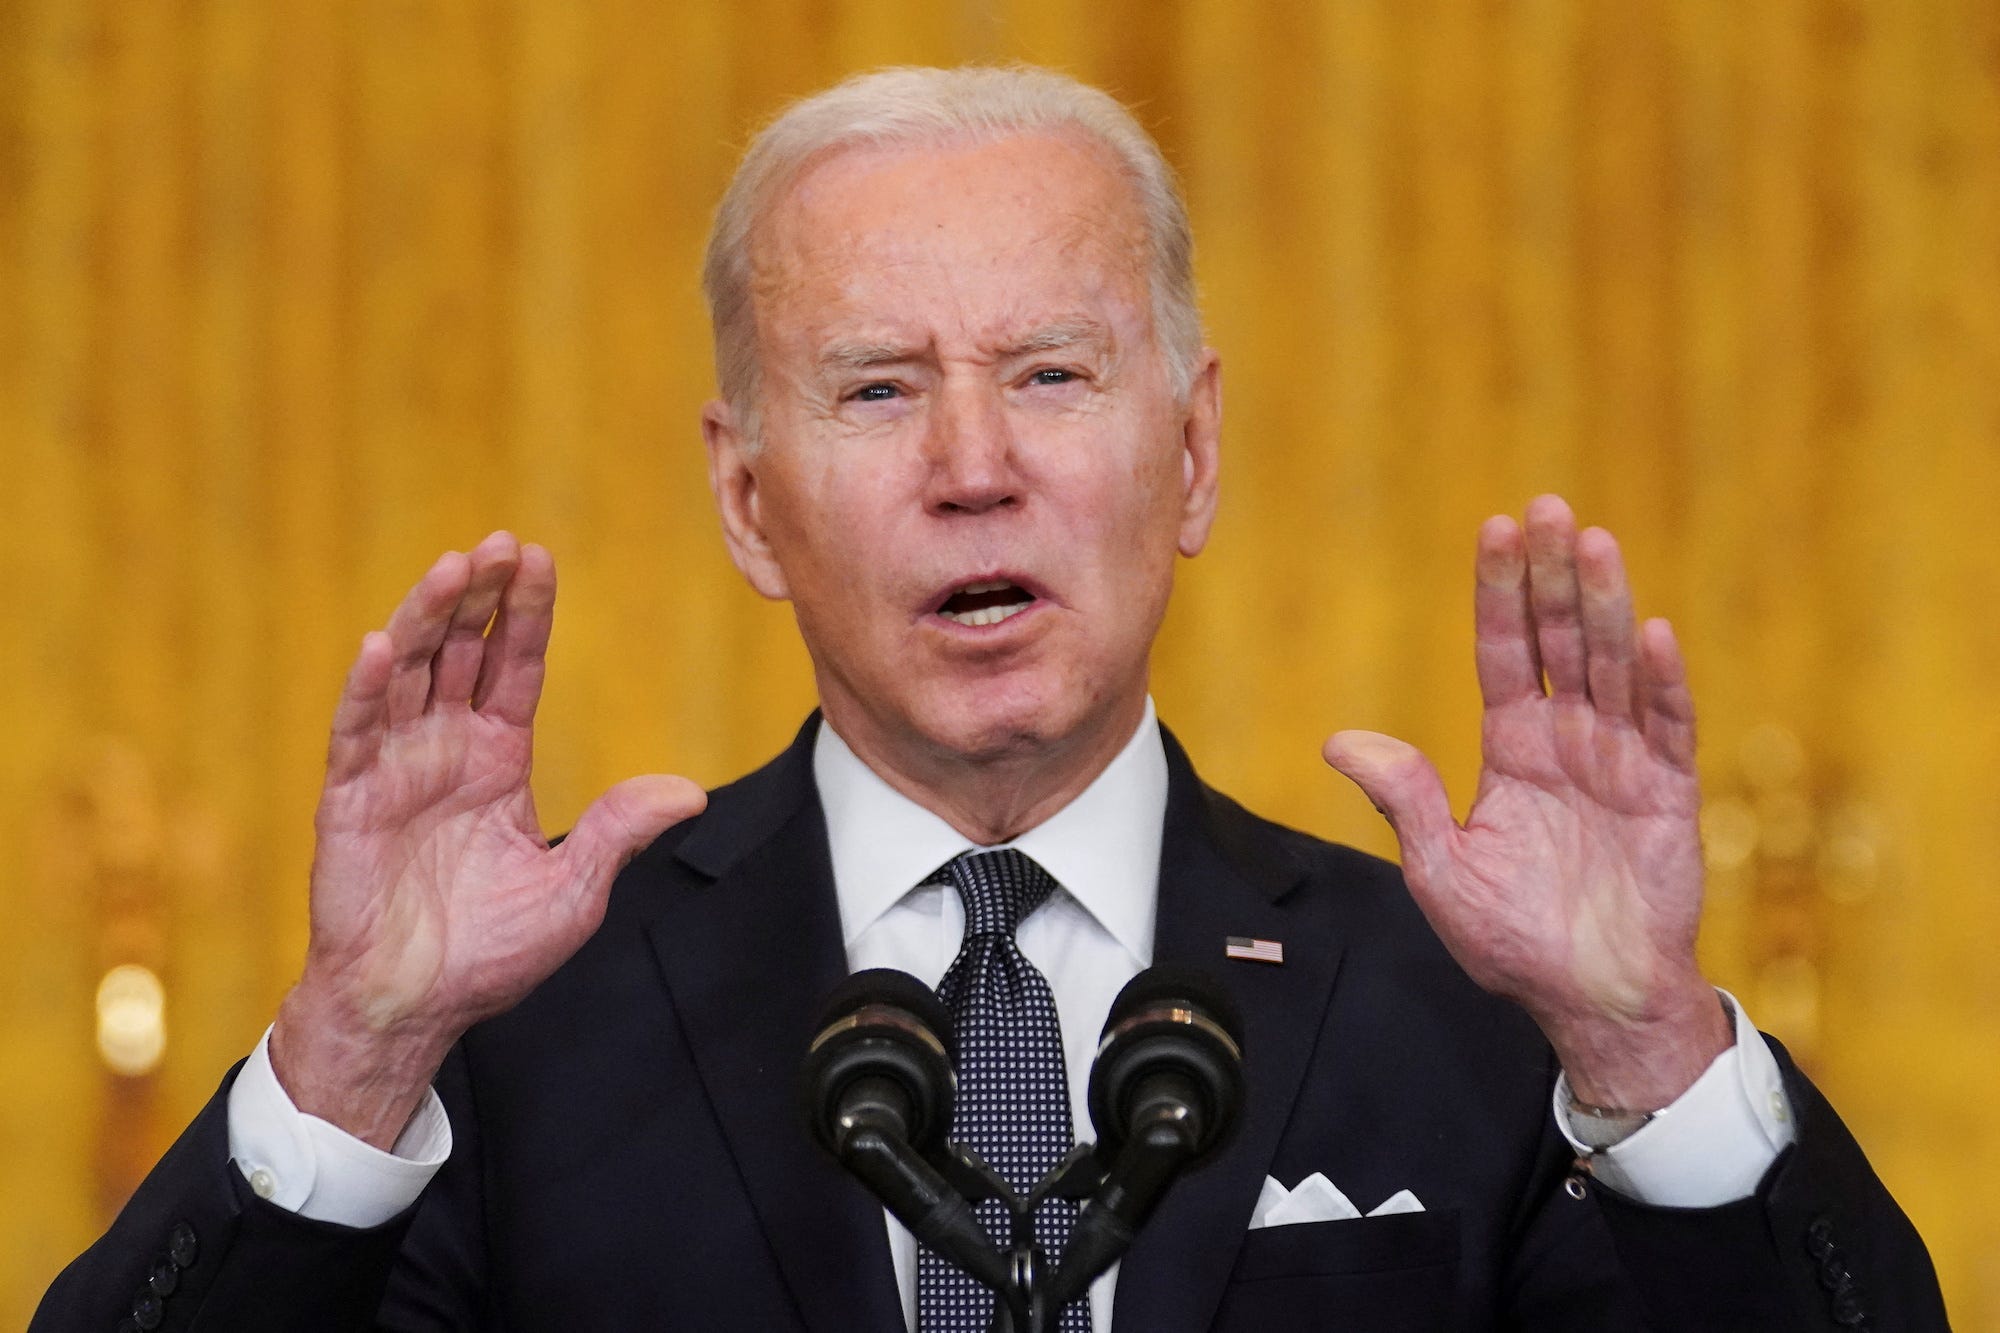 Biden delivering a speech at the White House